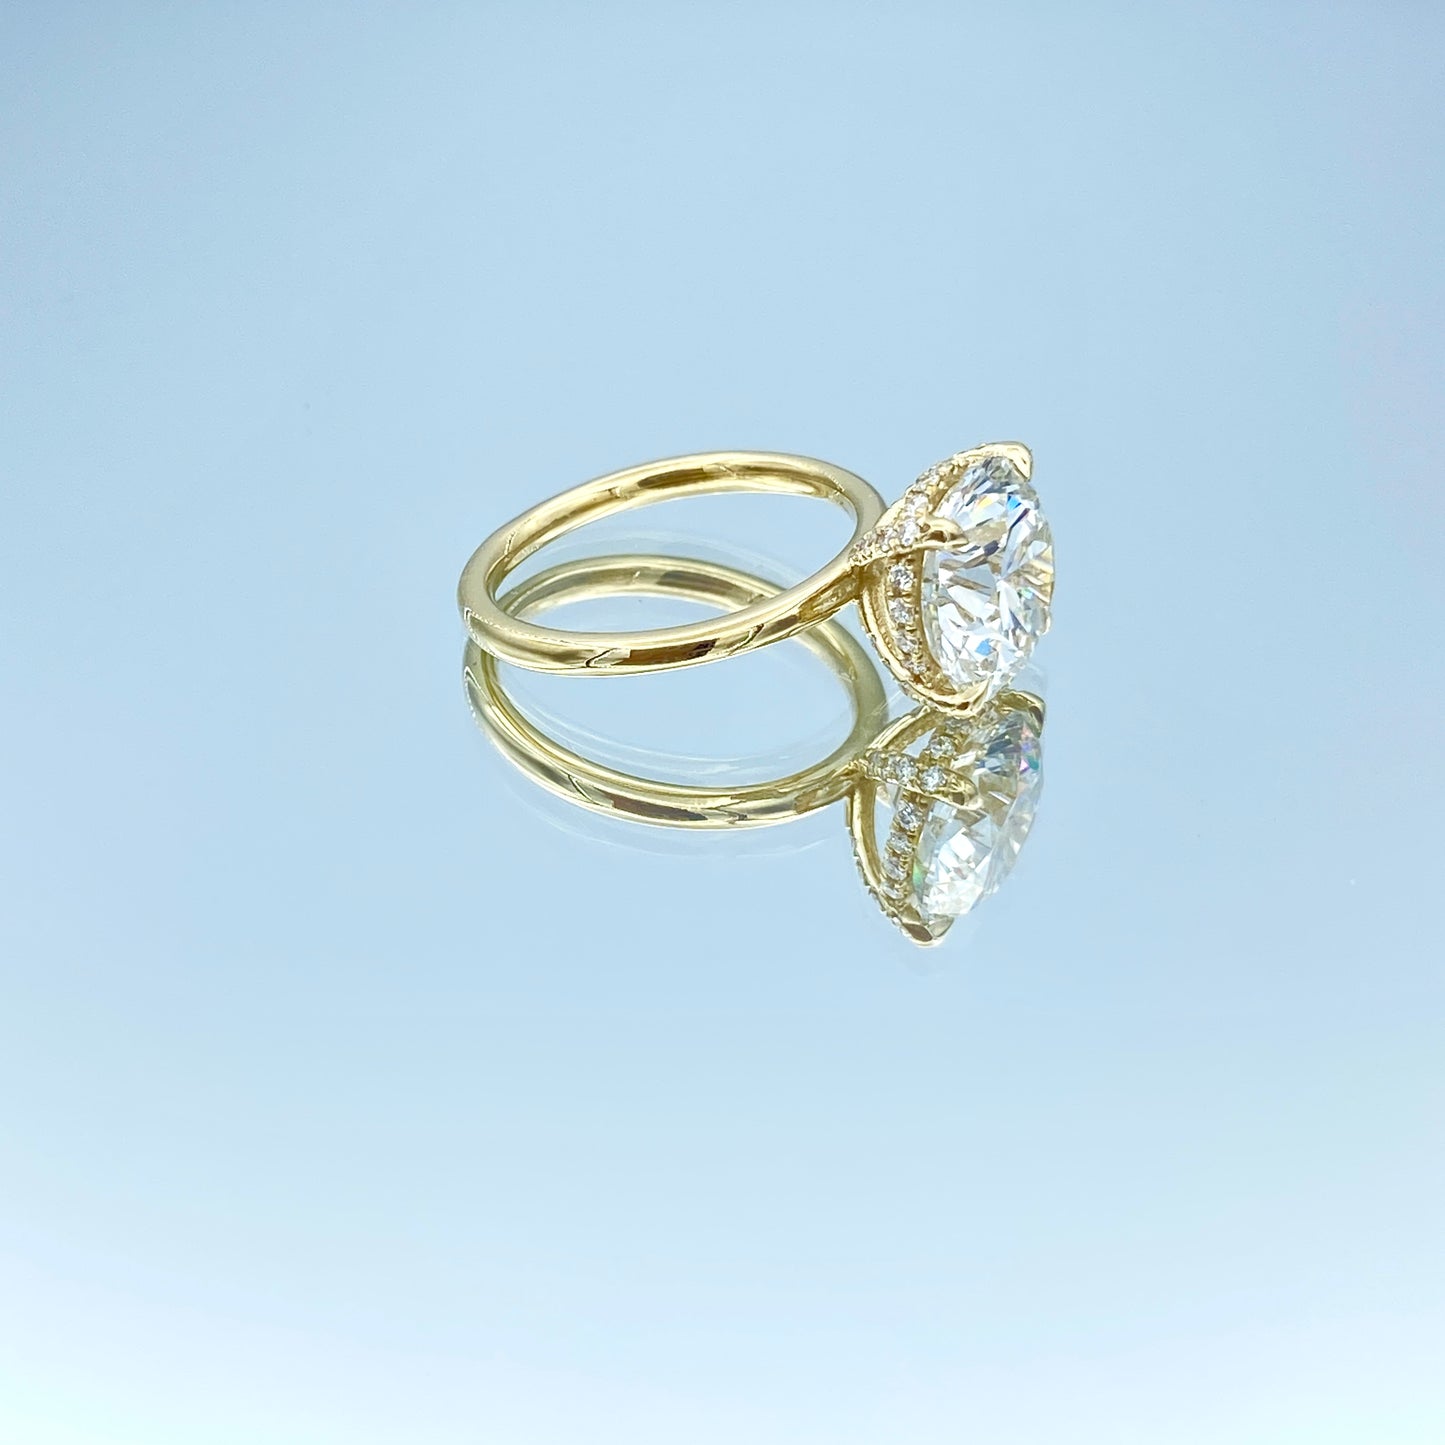 Hidden Halo Diamond Engagement Ring in 14K Yellow Gold - L and L Jewelry